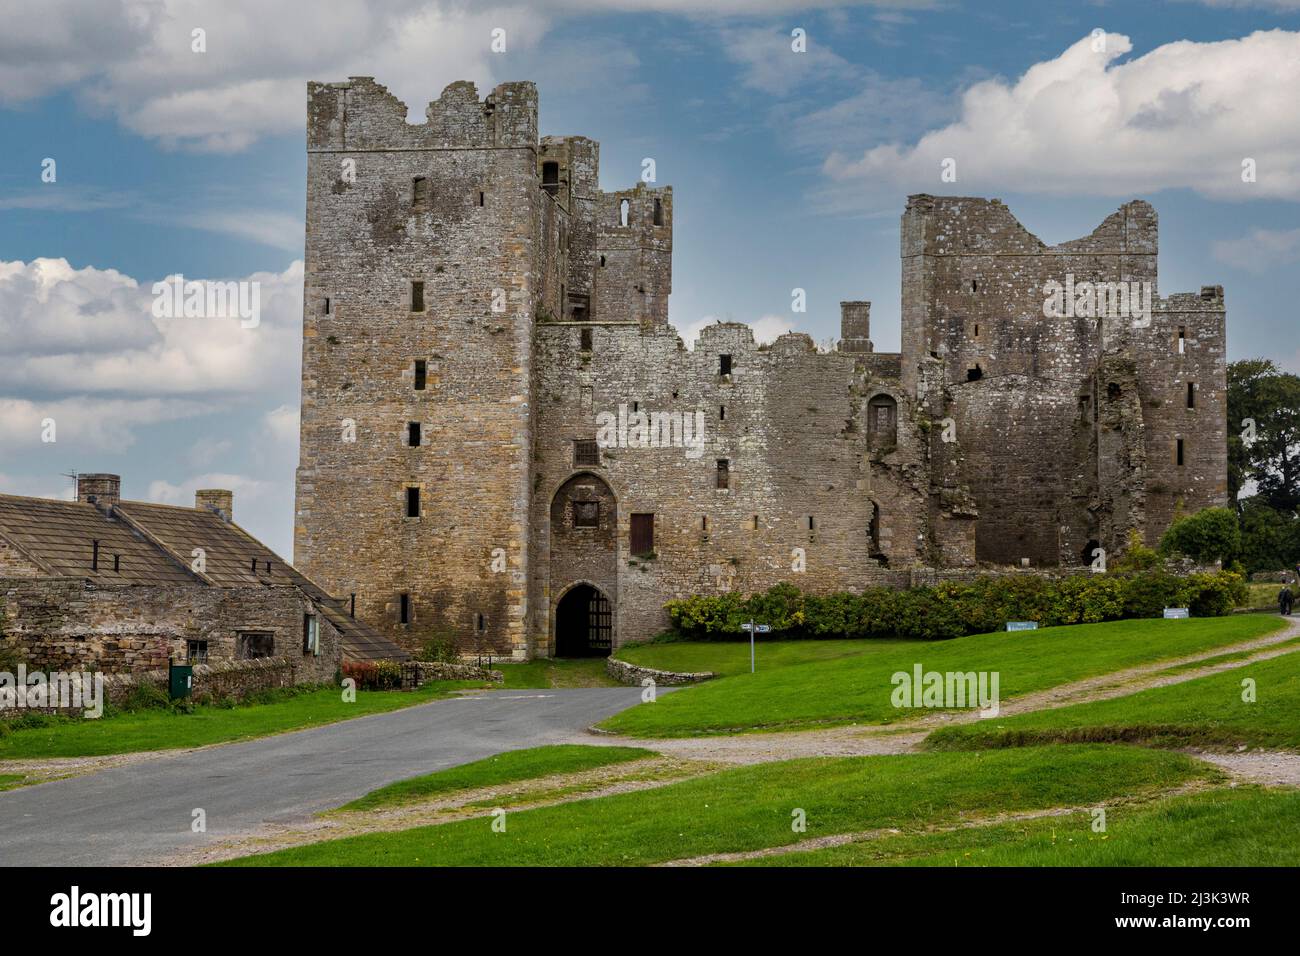 UK, England, Yorkshire.  Bolton Castle, finished 1399, where Mary Queen of Scots was imprisoned several months in 1568-69. Stock Photo